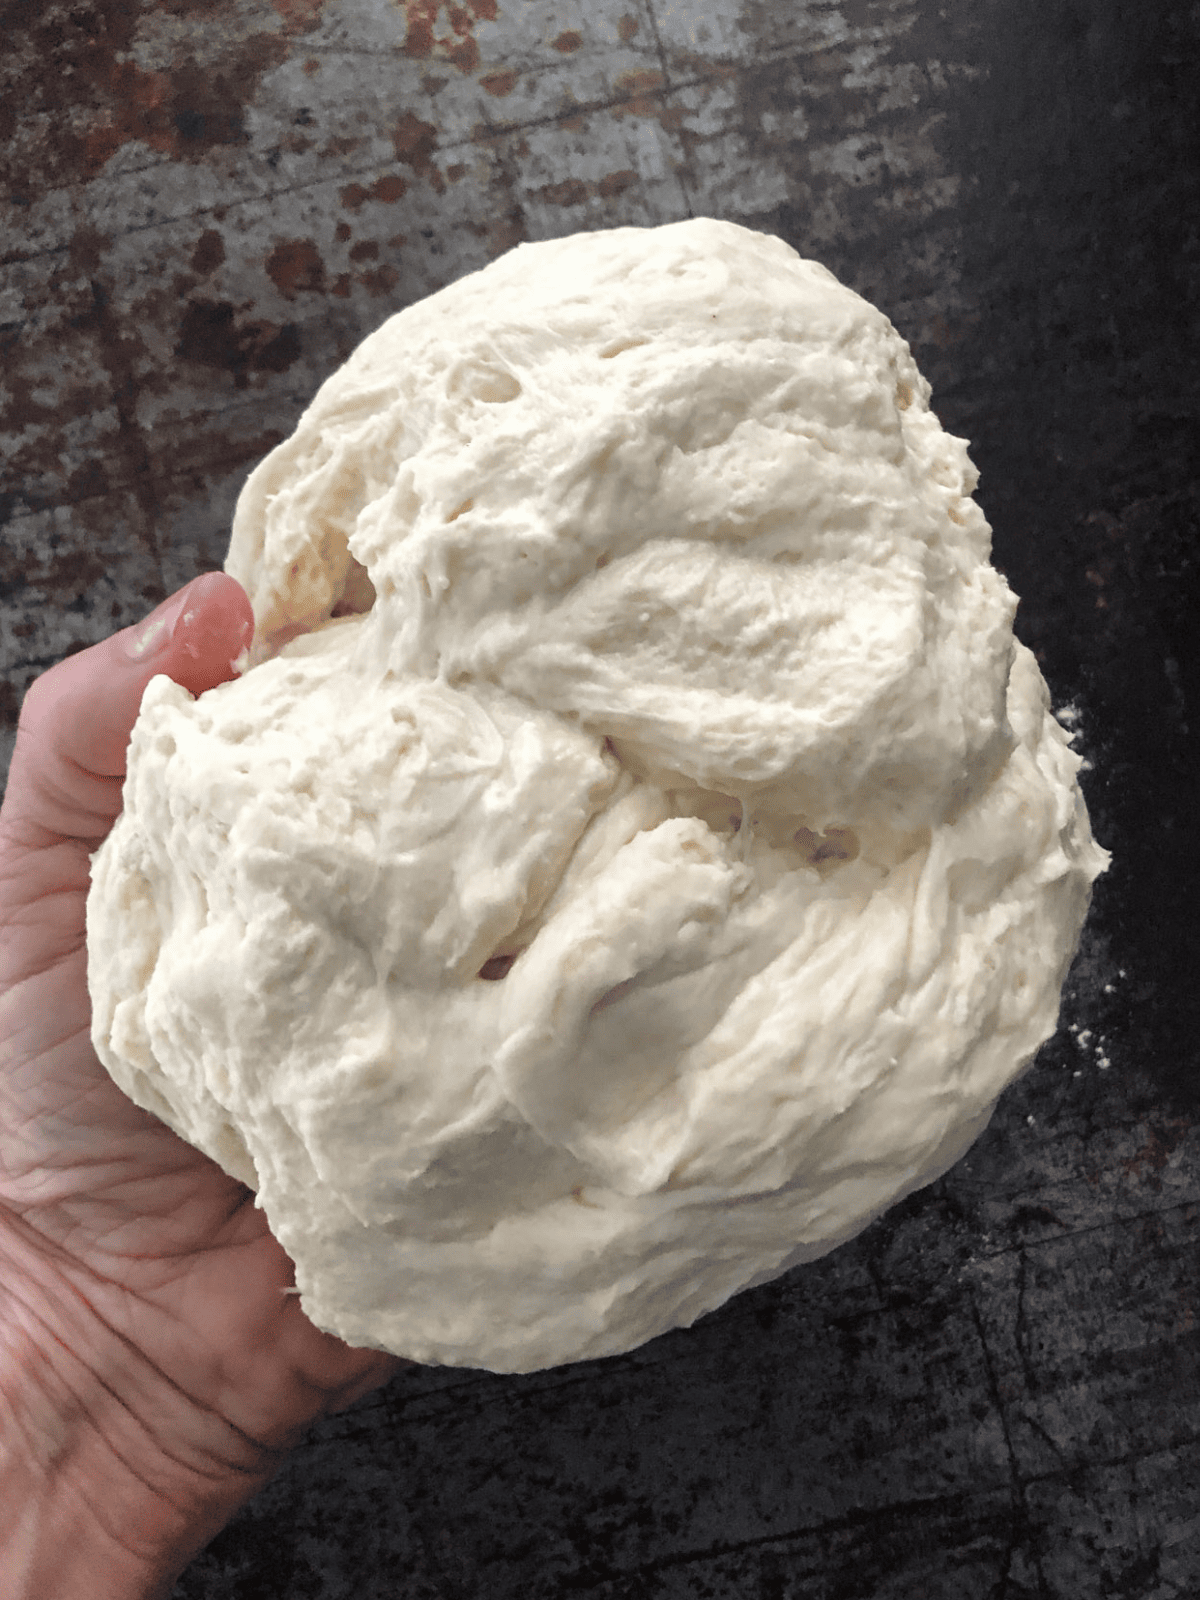 Hand holding a large ball of pizza dough.